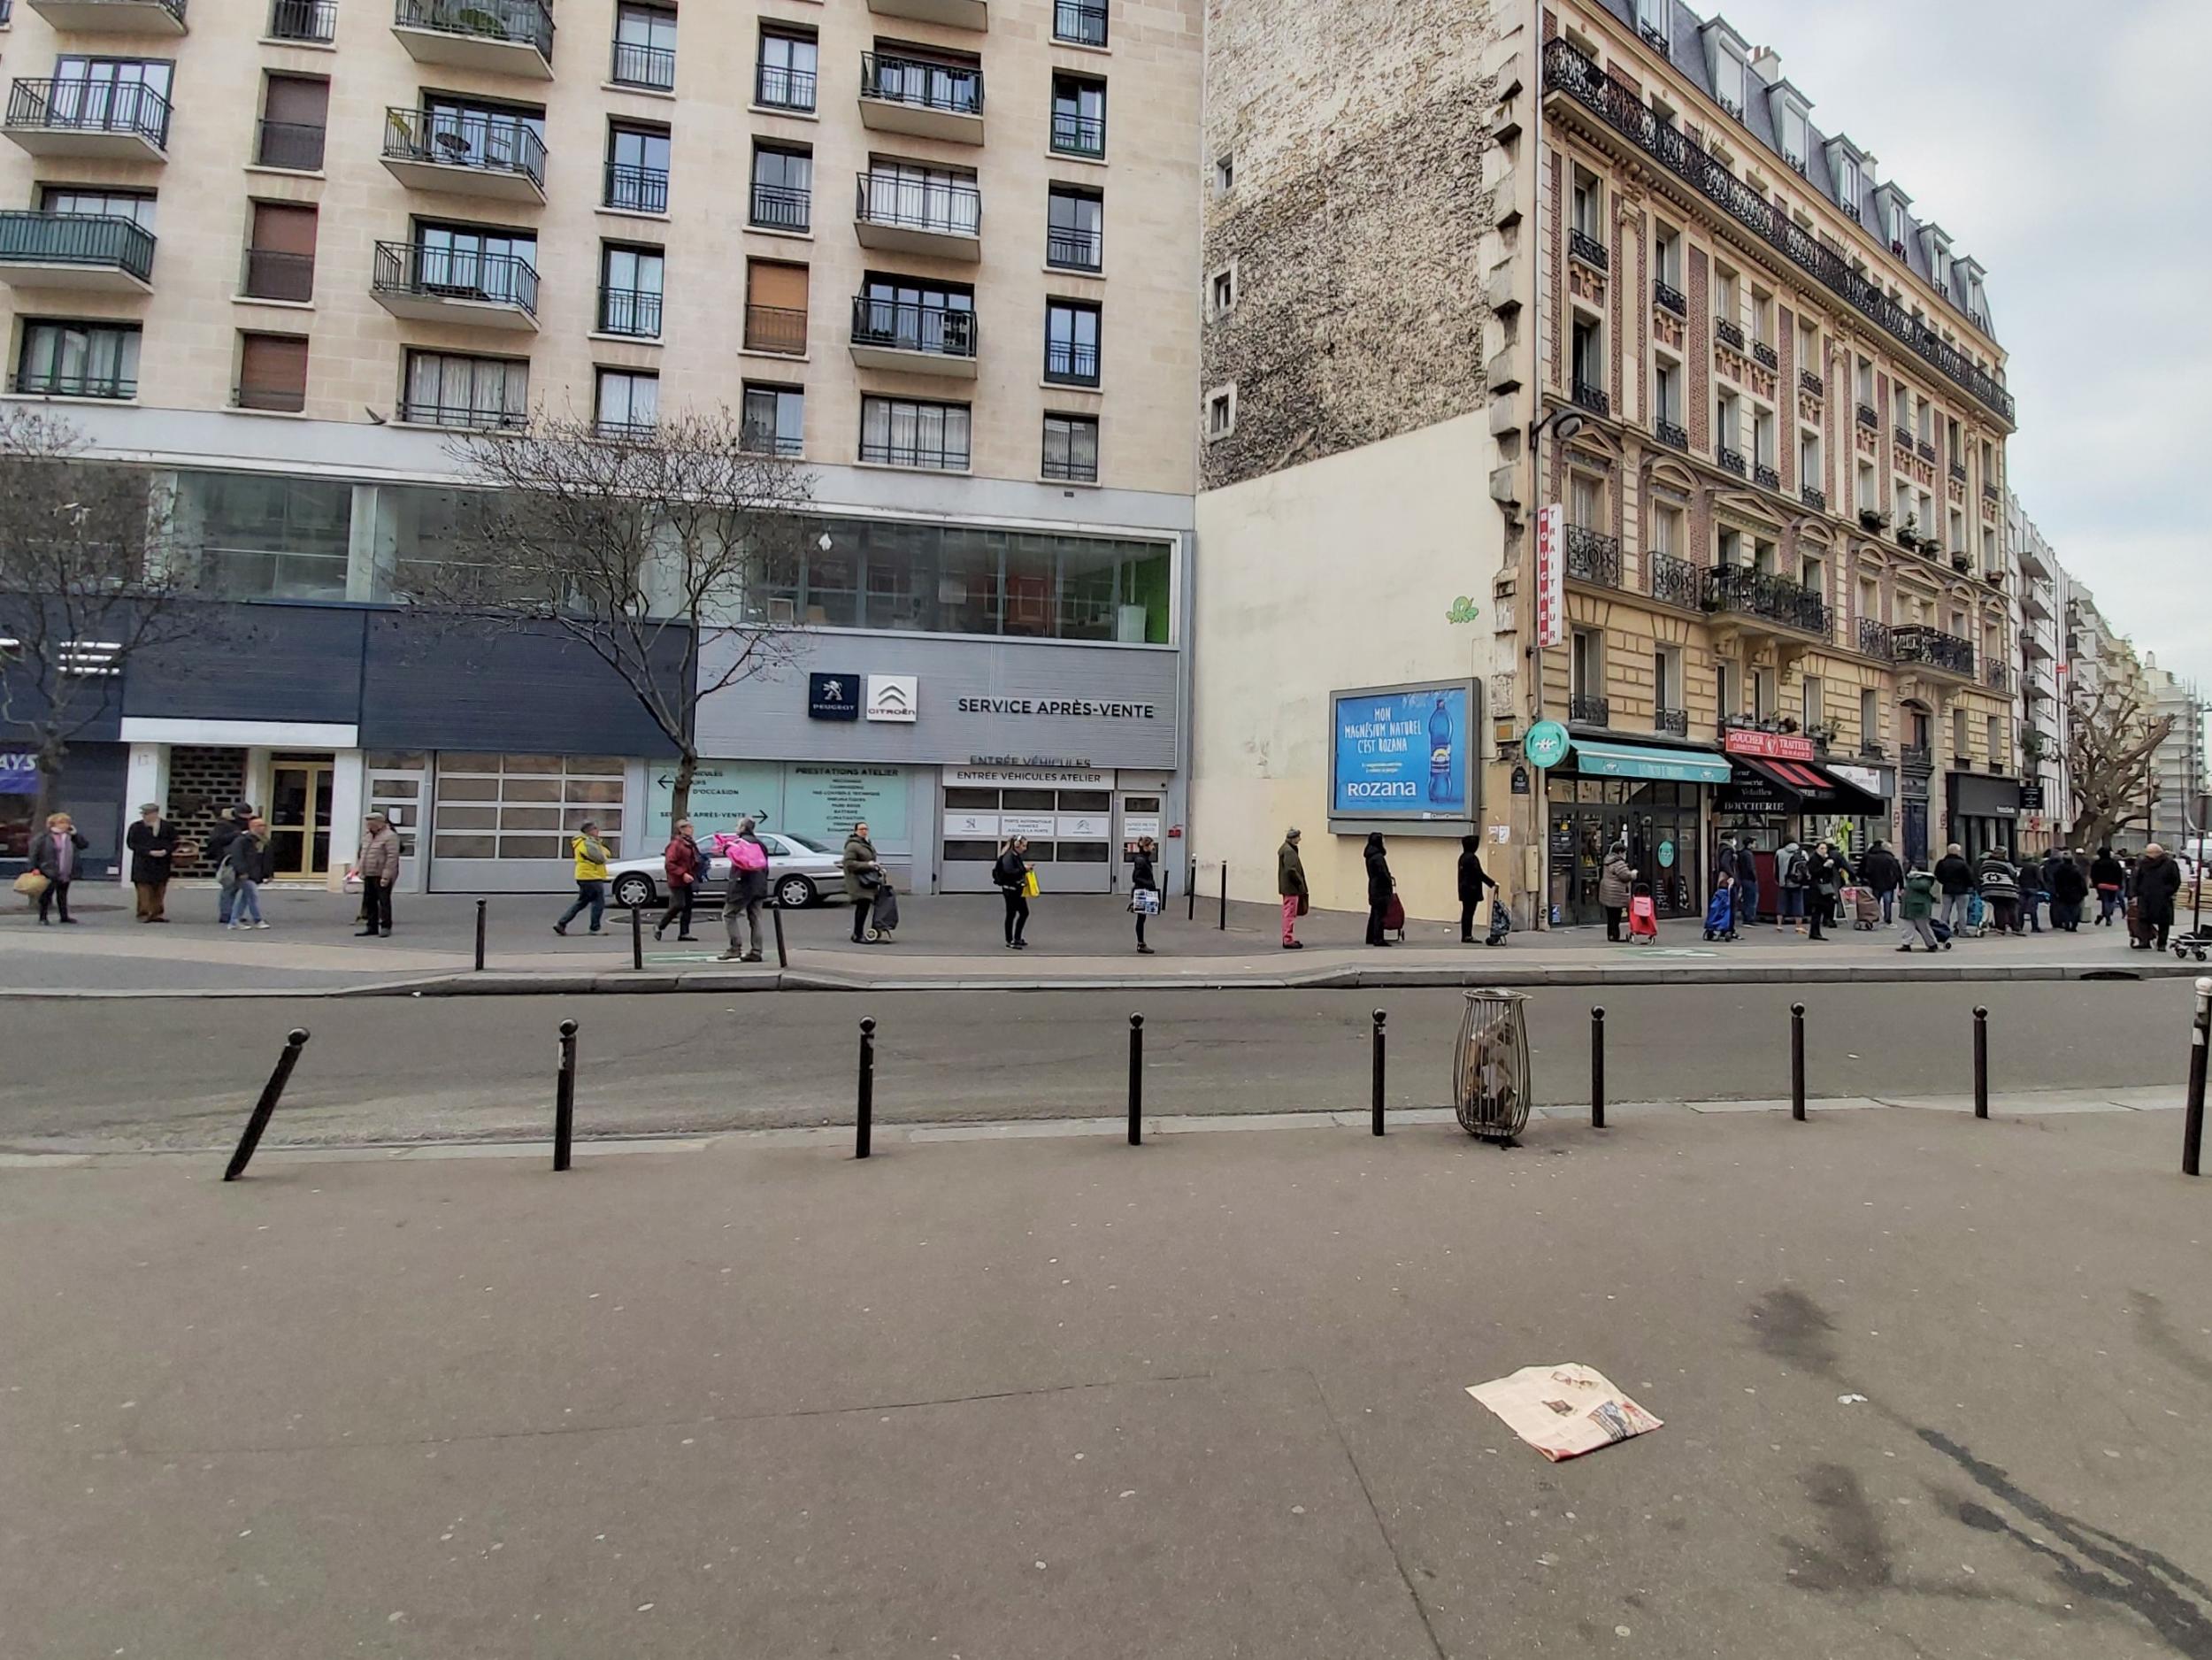 A queue for a supermarket stretches for hundreds of metres in Paris, France, ahead of the midday lockdown, 17 March, 2020